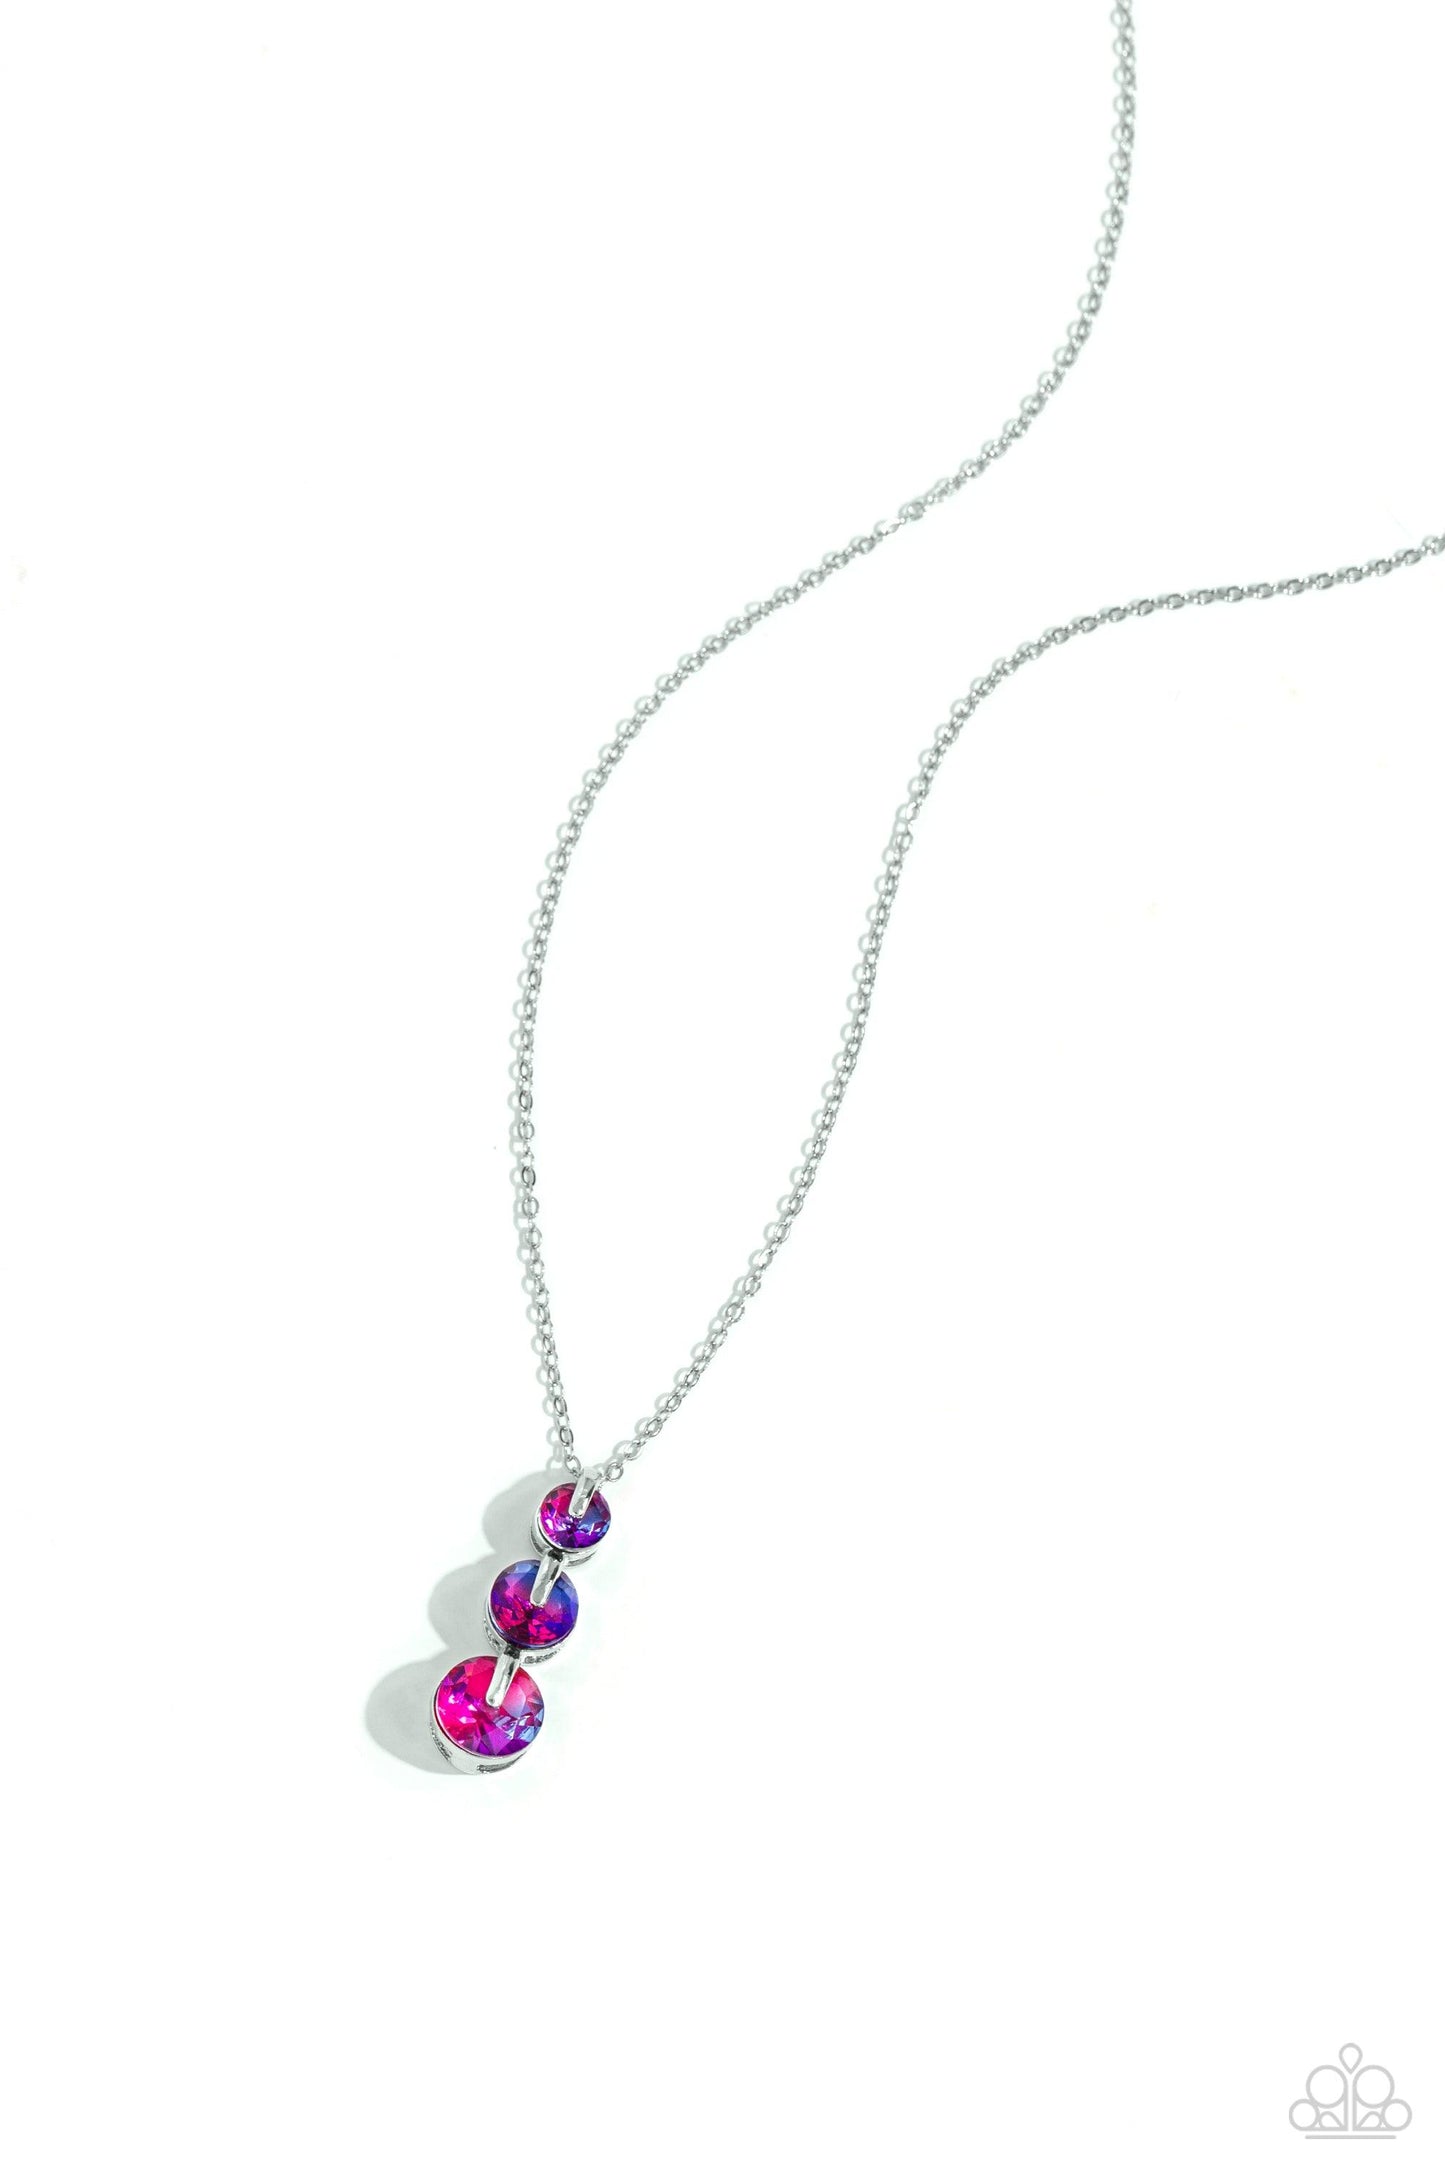 Paparazzi Accessories - Ombré Obsession - Multicolor Necklace - Bling by JessieK